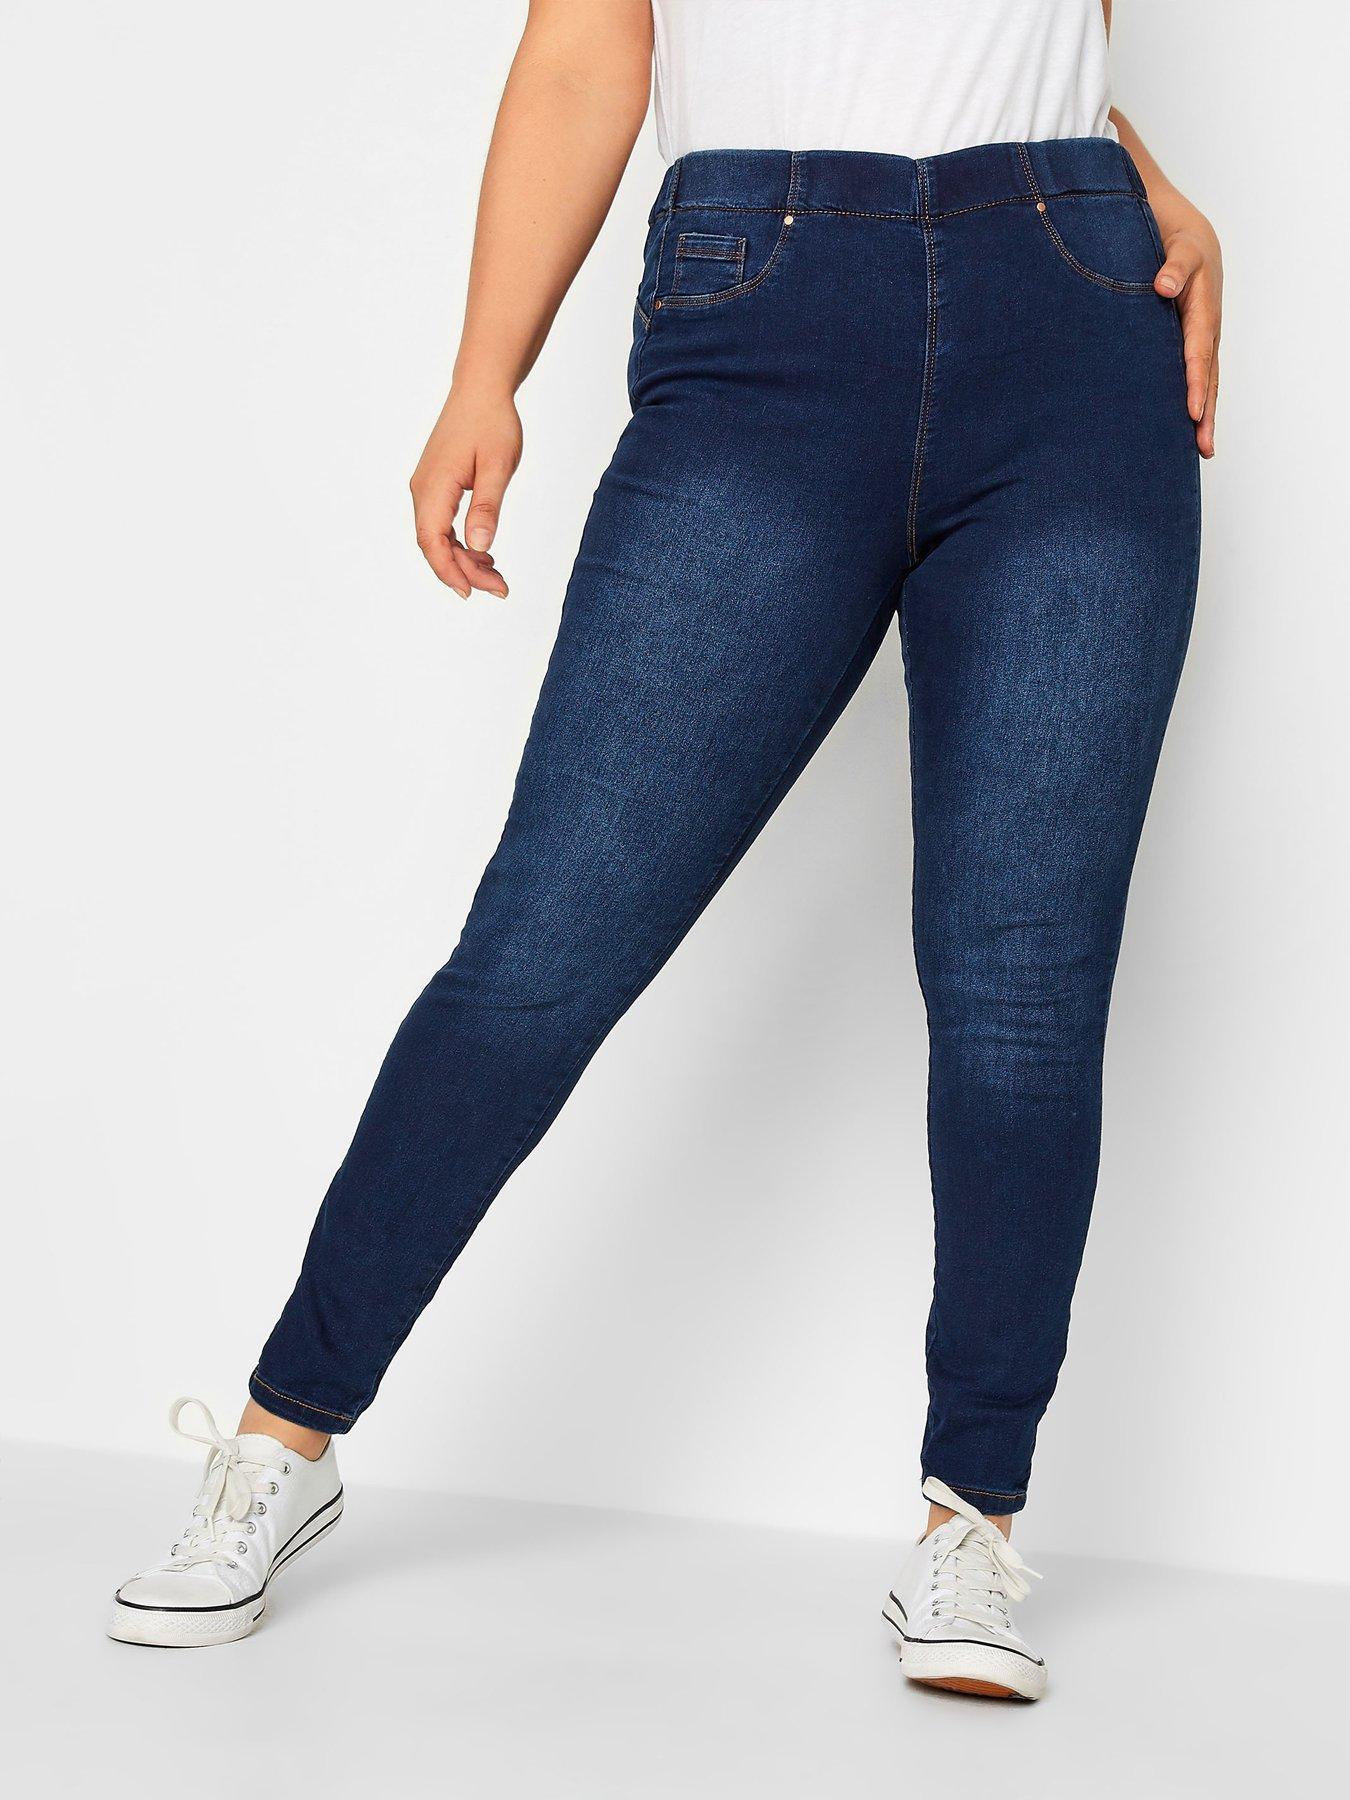 Buy Plus Size Plain Jeggings with Elasticised Waistband and Pocket Detail